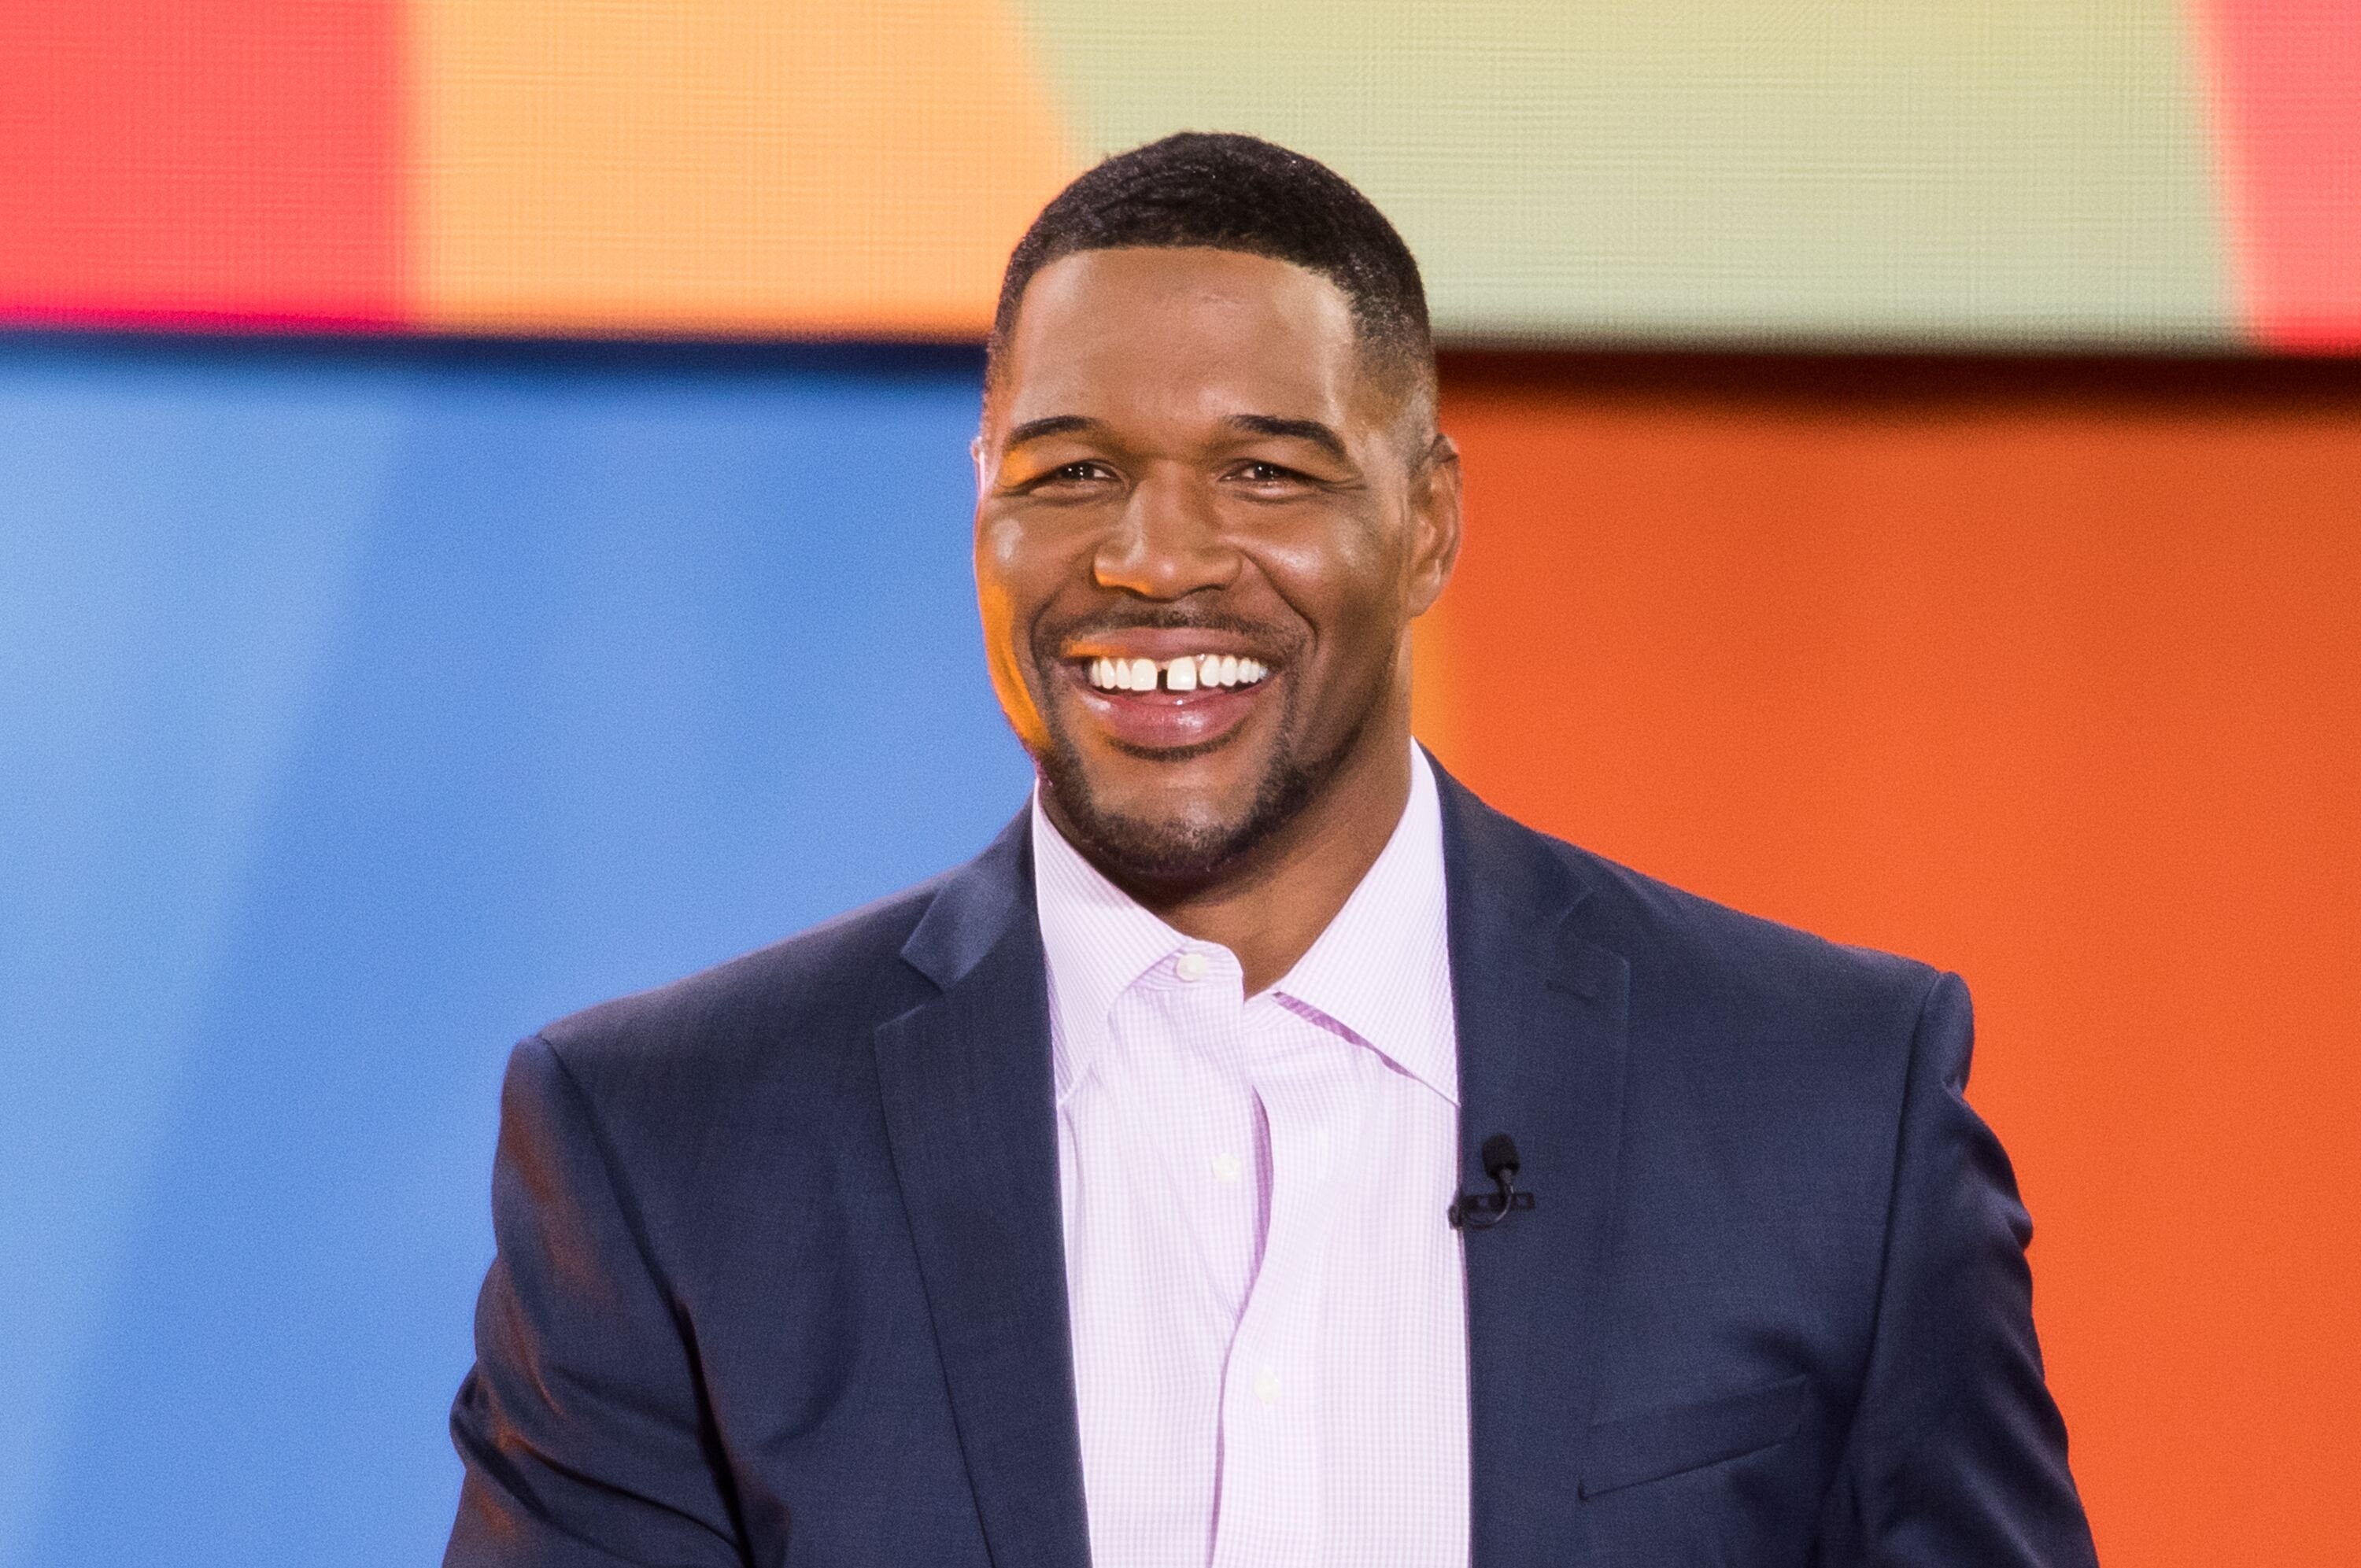 Michael Strahan attends ABC's "Good Morning America" at Rumsey Playfield, Central Park on July 6, 2018 | Photo: Getty Images